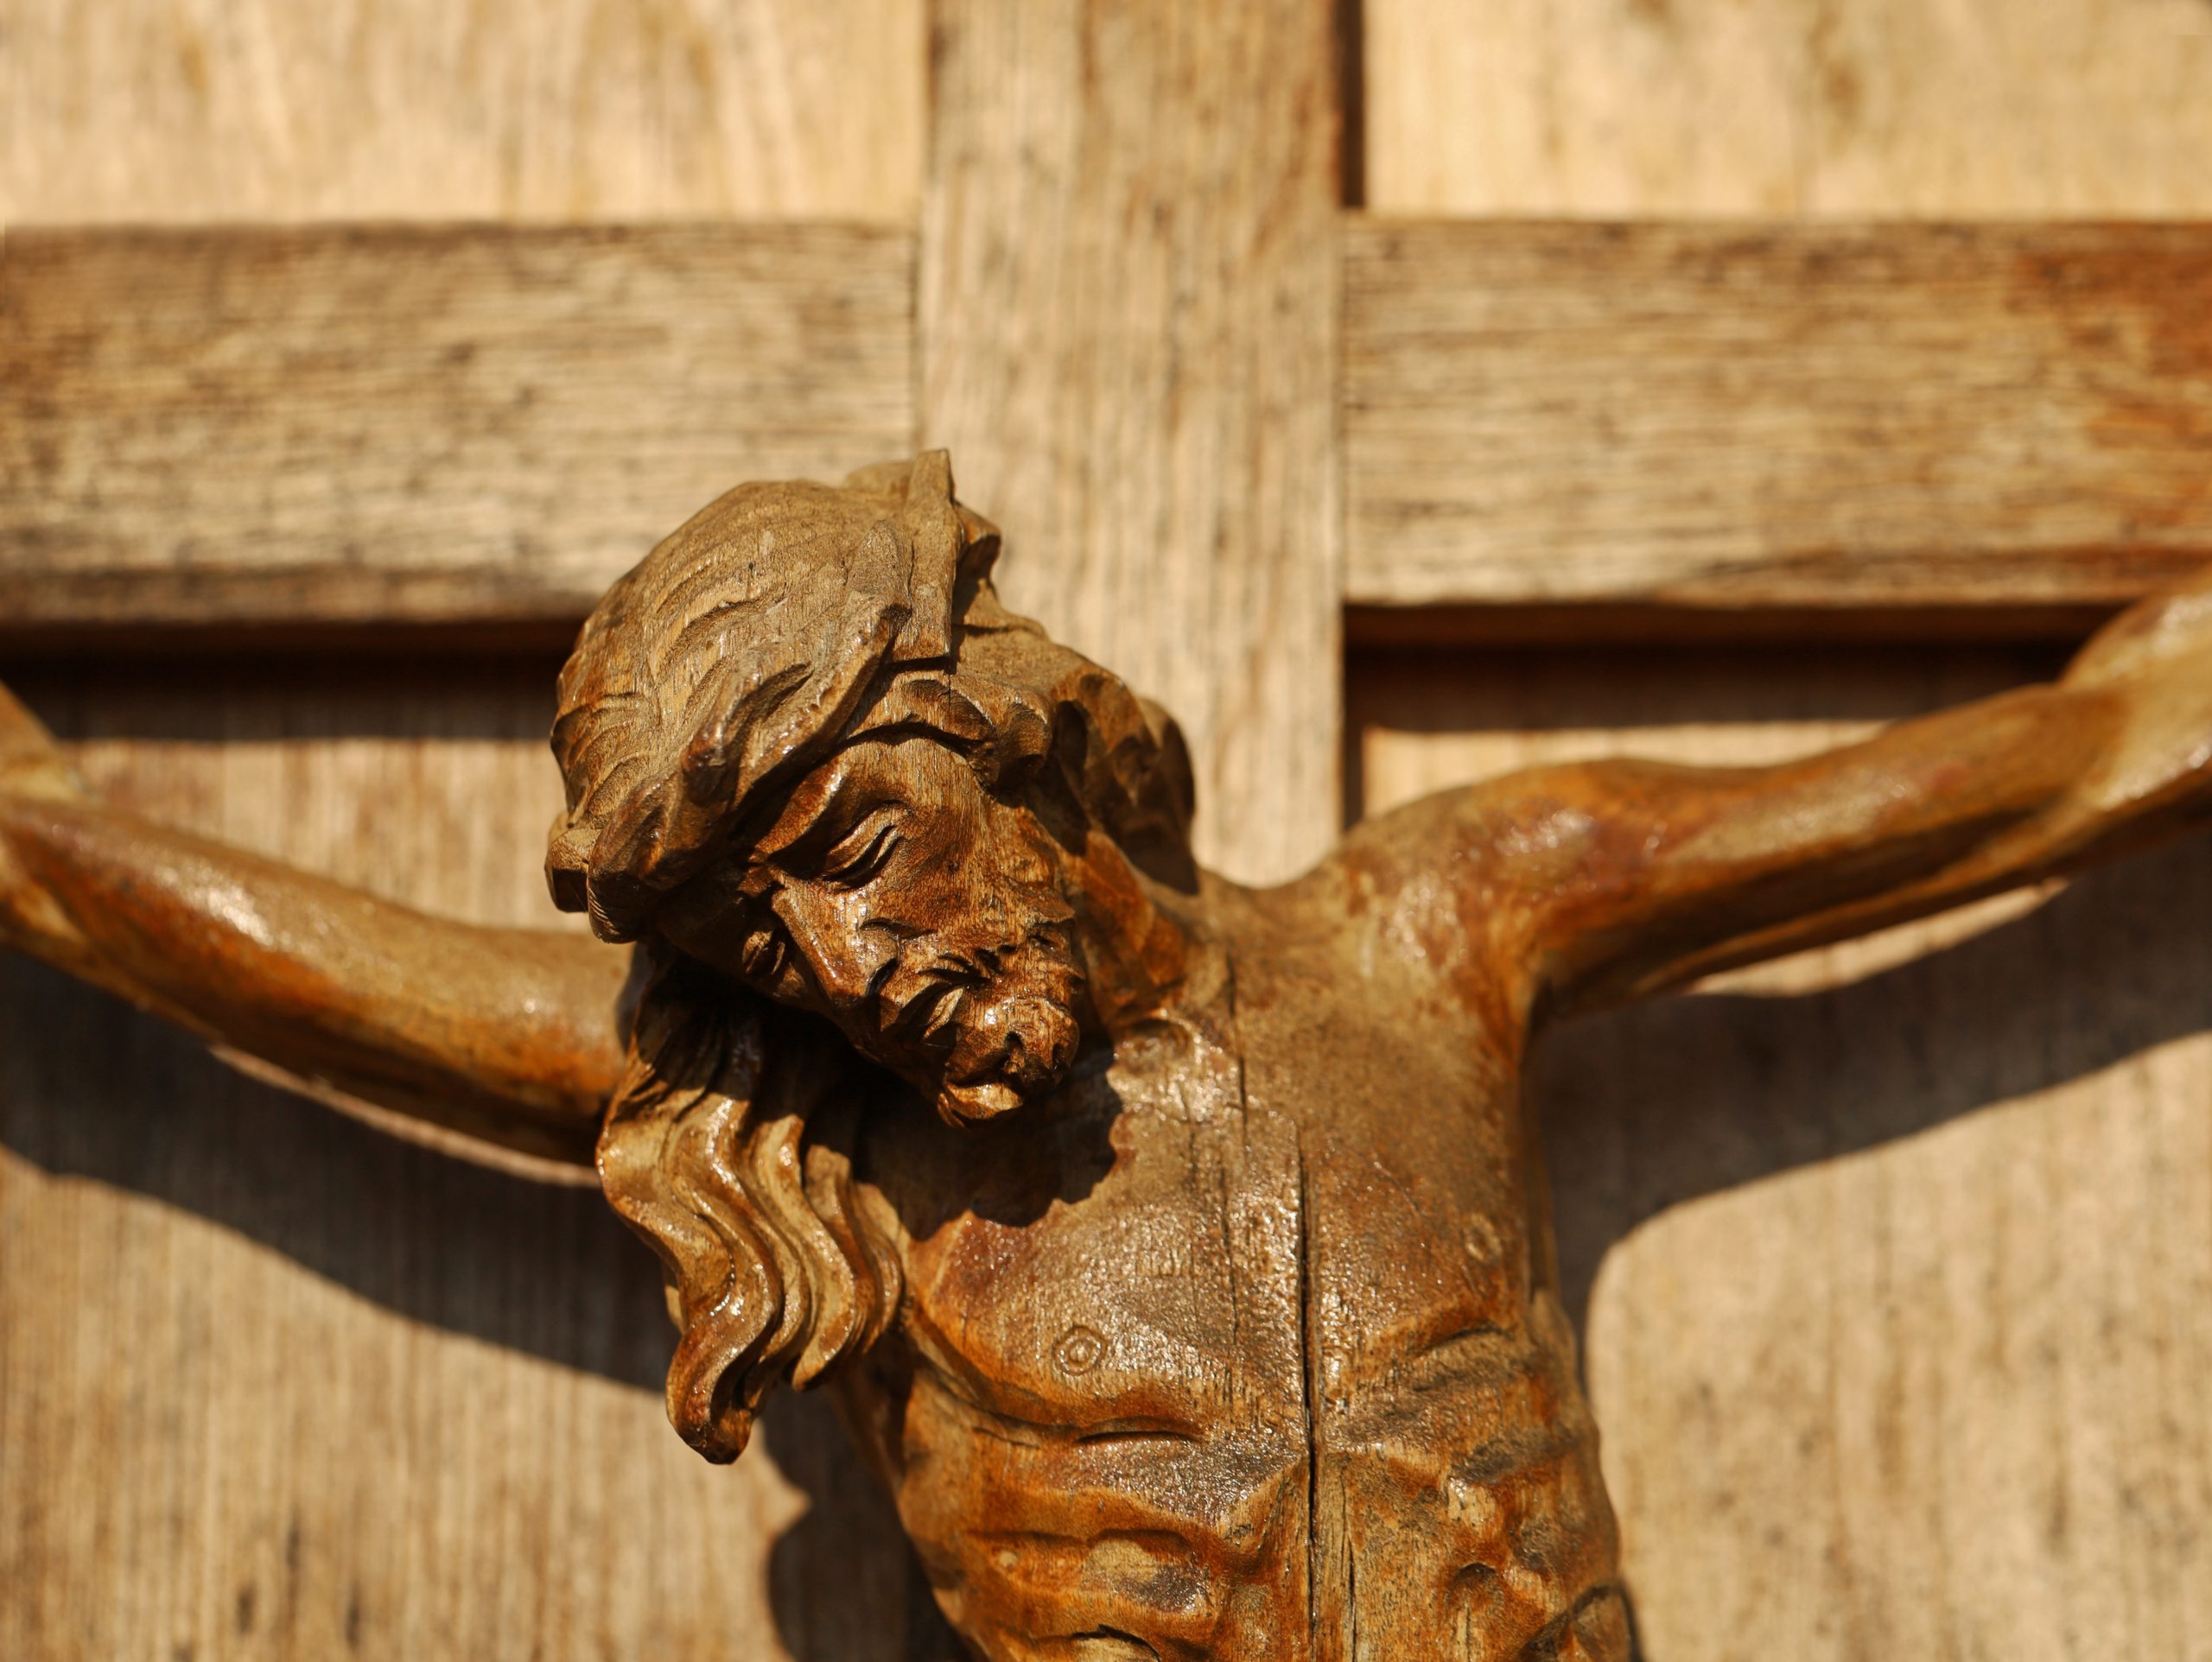 Embracing the Cross is Superior to 'Feeling Good'